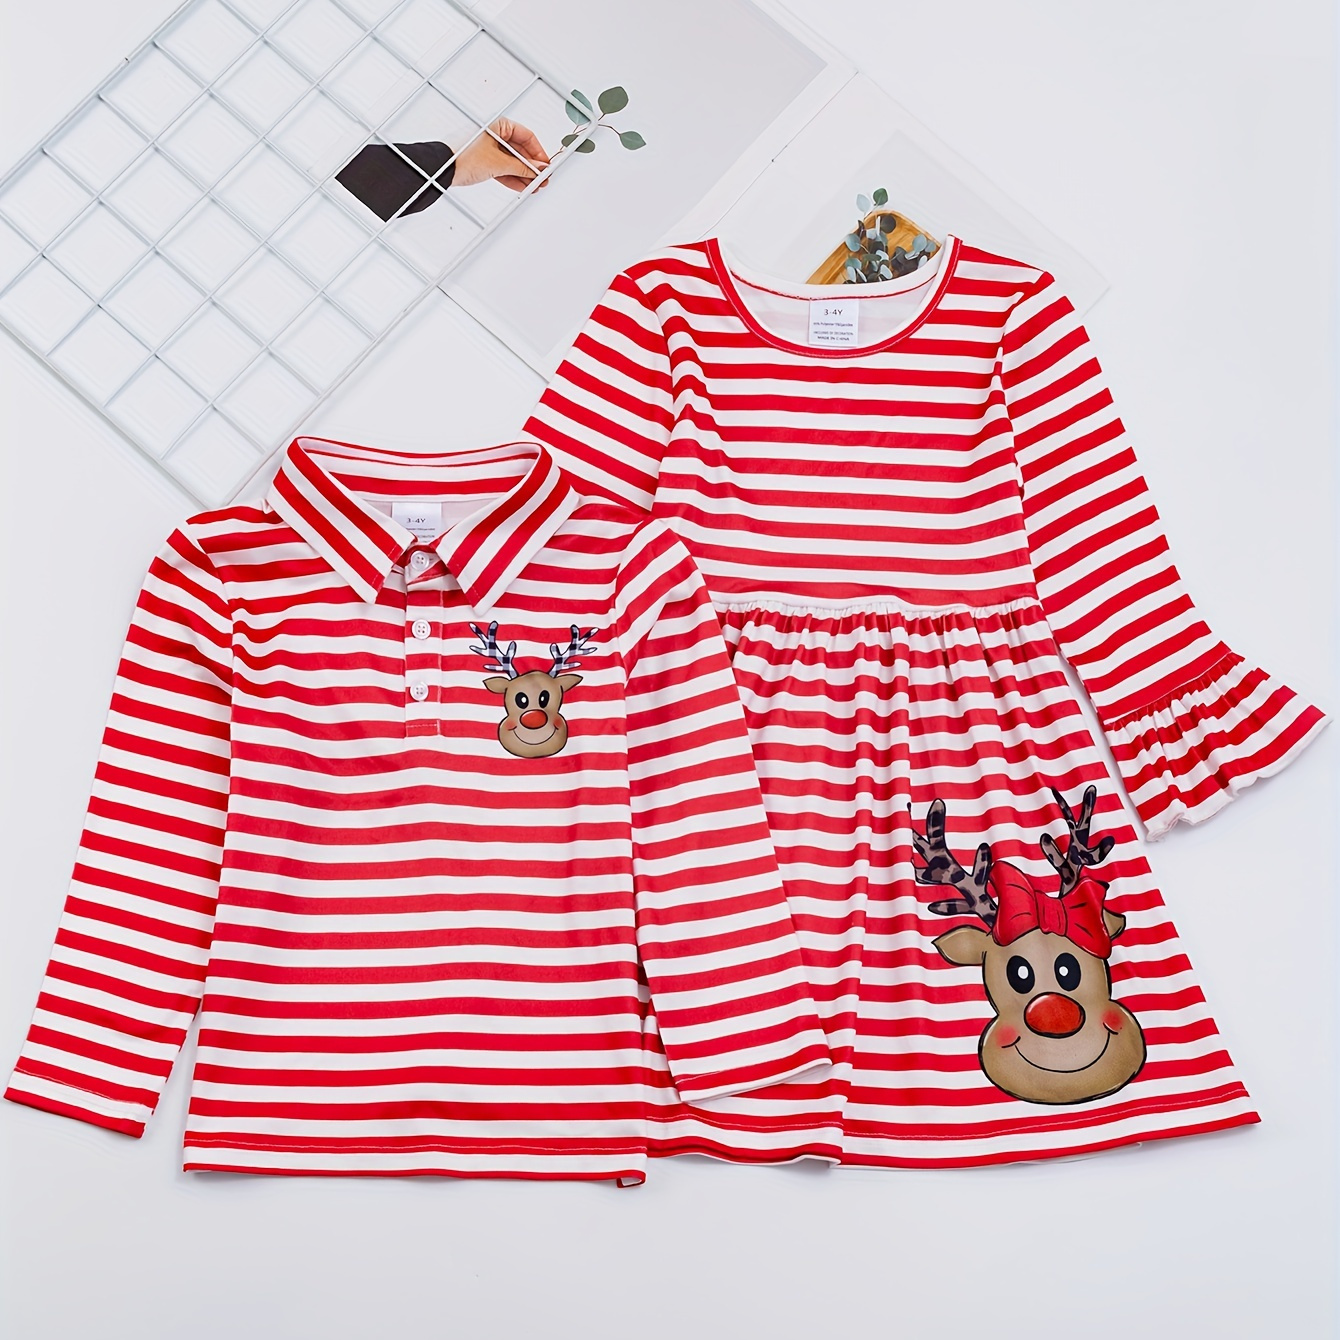 

1pcs (not 2pcs, Please Purchase Boy's Or Girl's Clothing Separately) Sister And Brother Matching Striped Dress Or Shirt, Christmas Reindeer Print Clothes For Vacation Family Activities